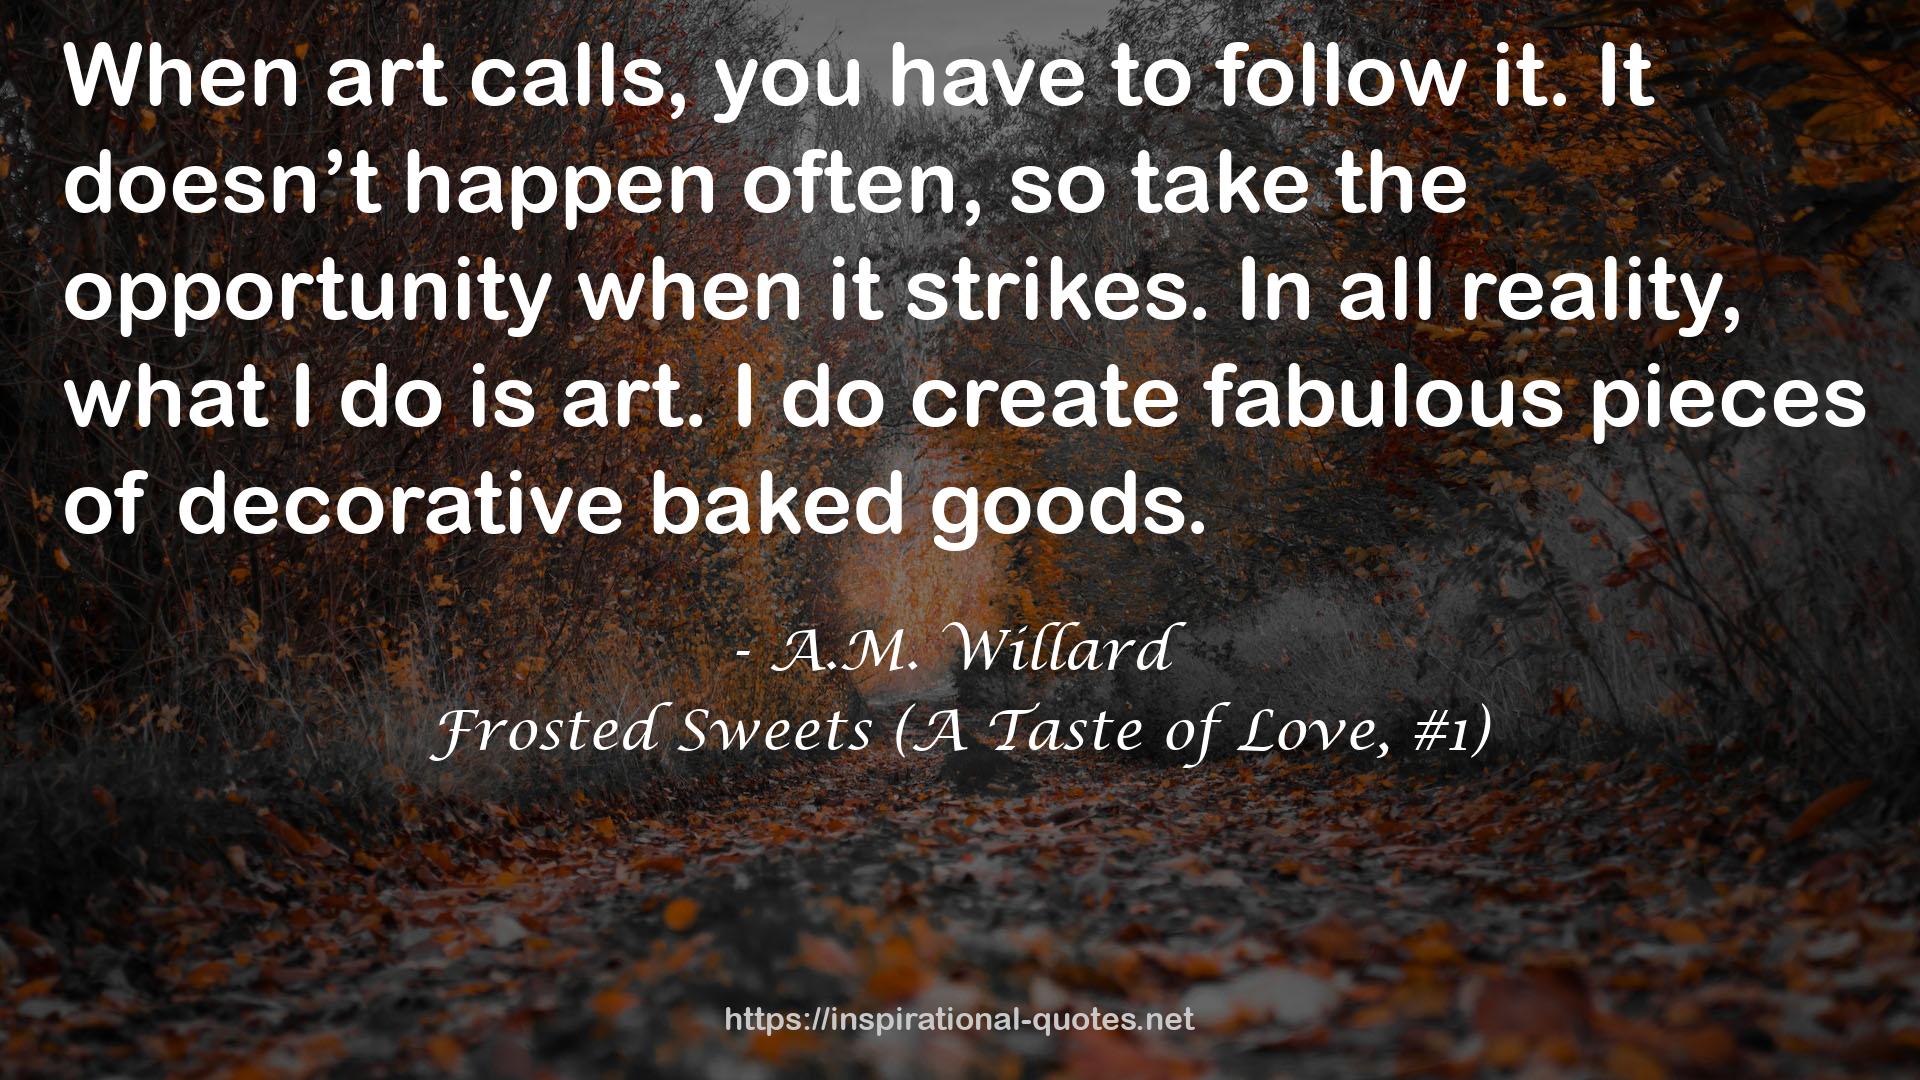 Frosted Sweets (A Taste of Love, #1) QUOTES